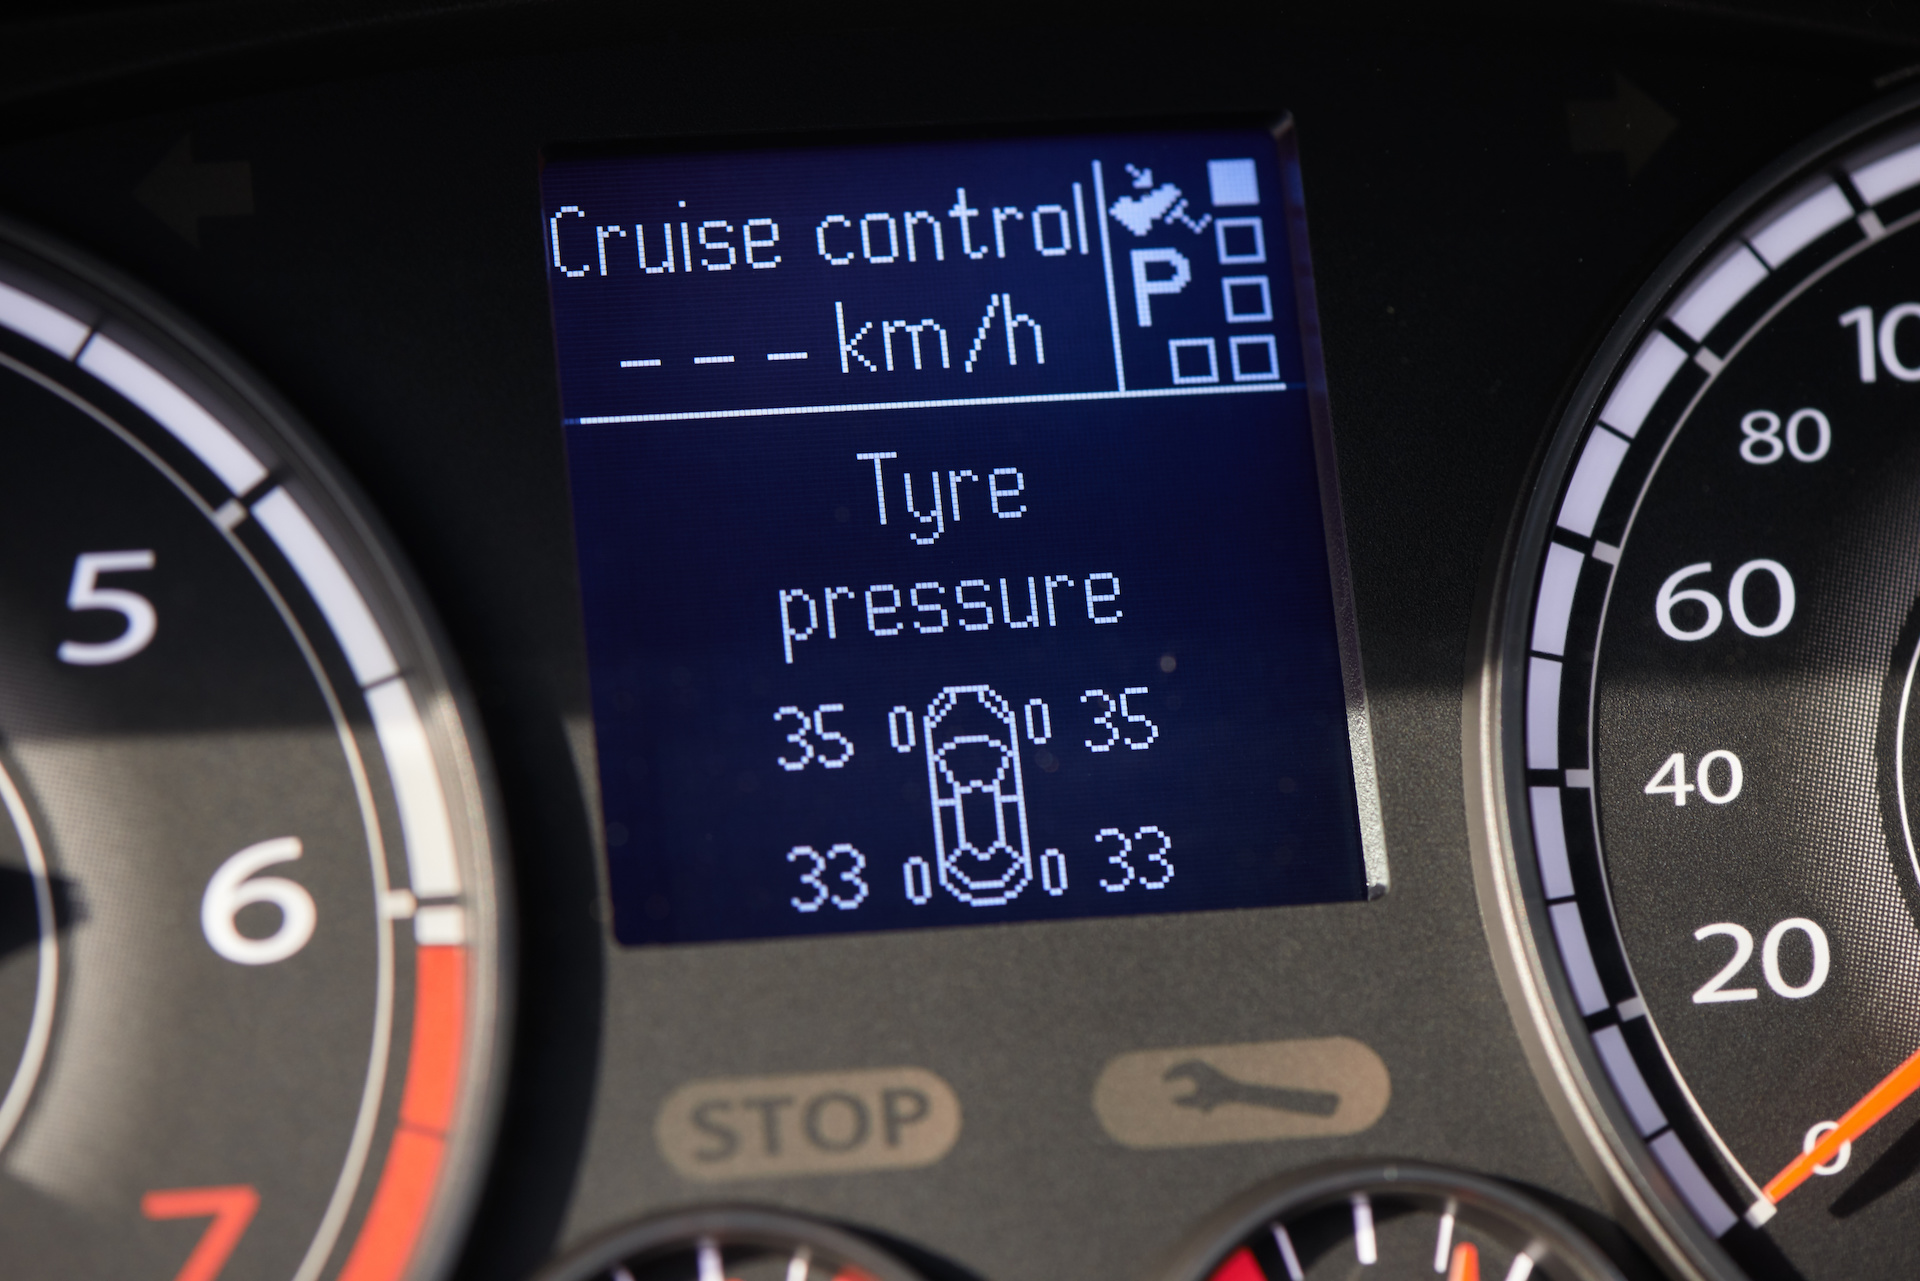 Tyre pressure on the dashboard of a vehicle.